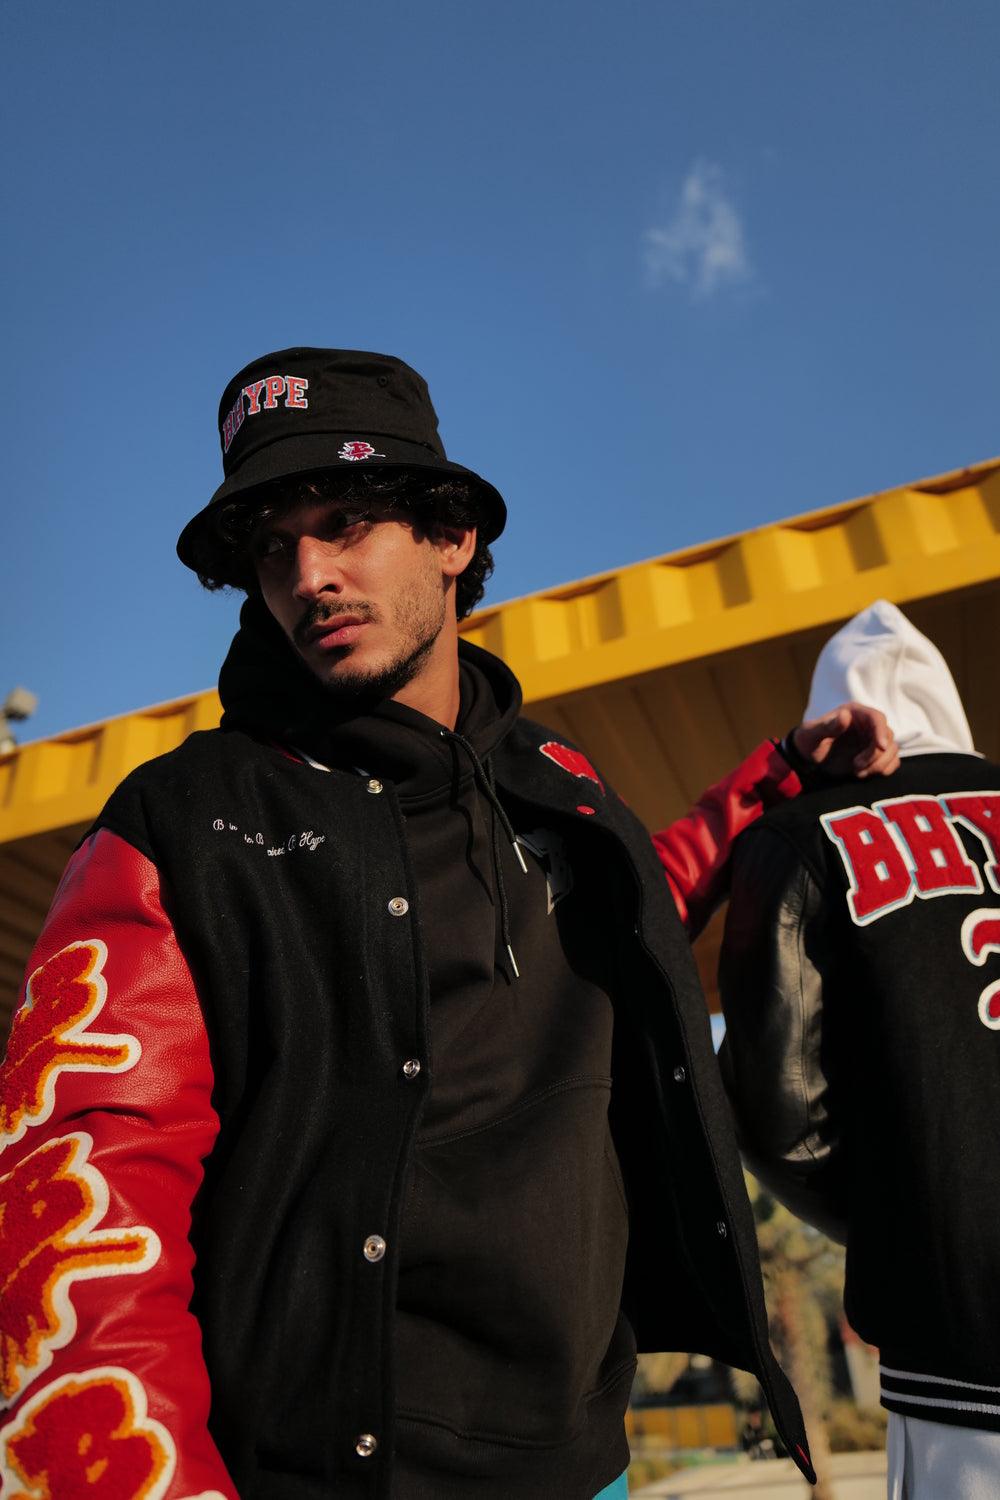 BHYPE VARSITY COLLECTION JACKET BLACK/RED - B-Hype Society